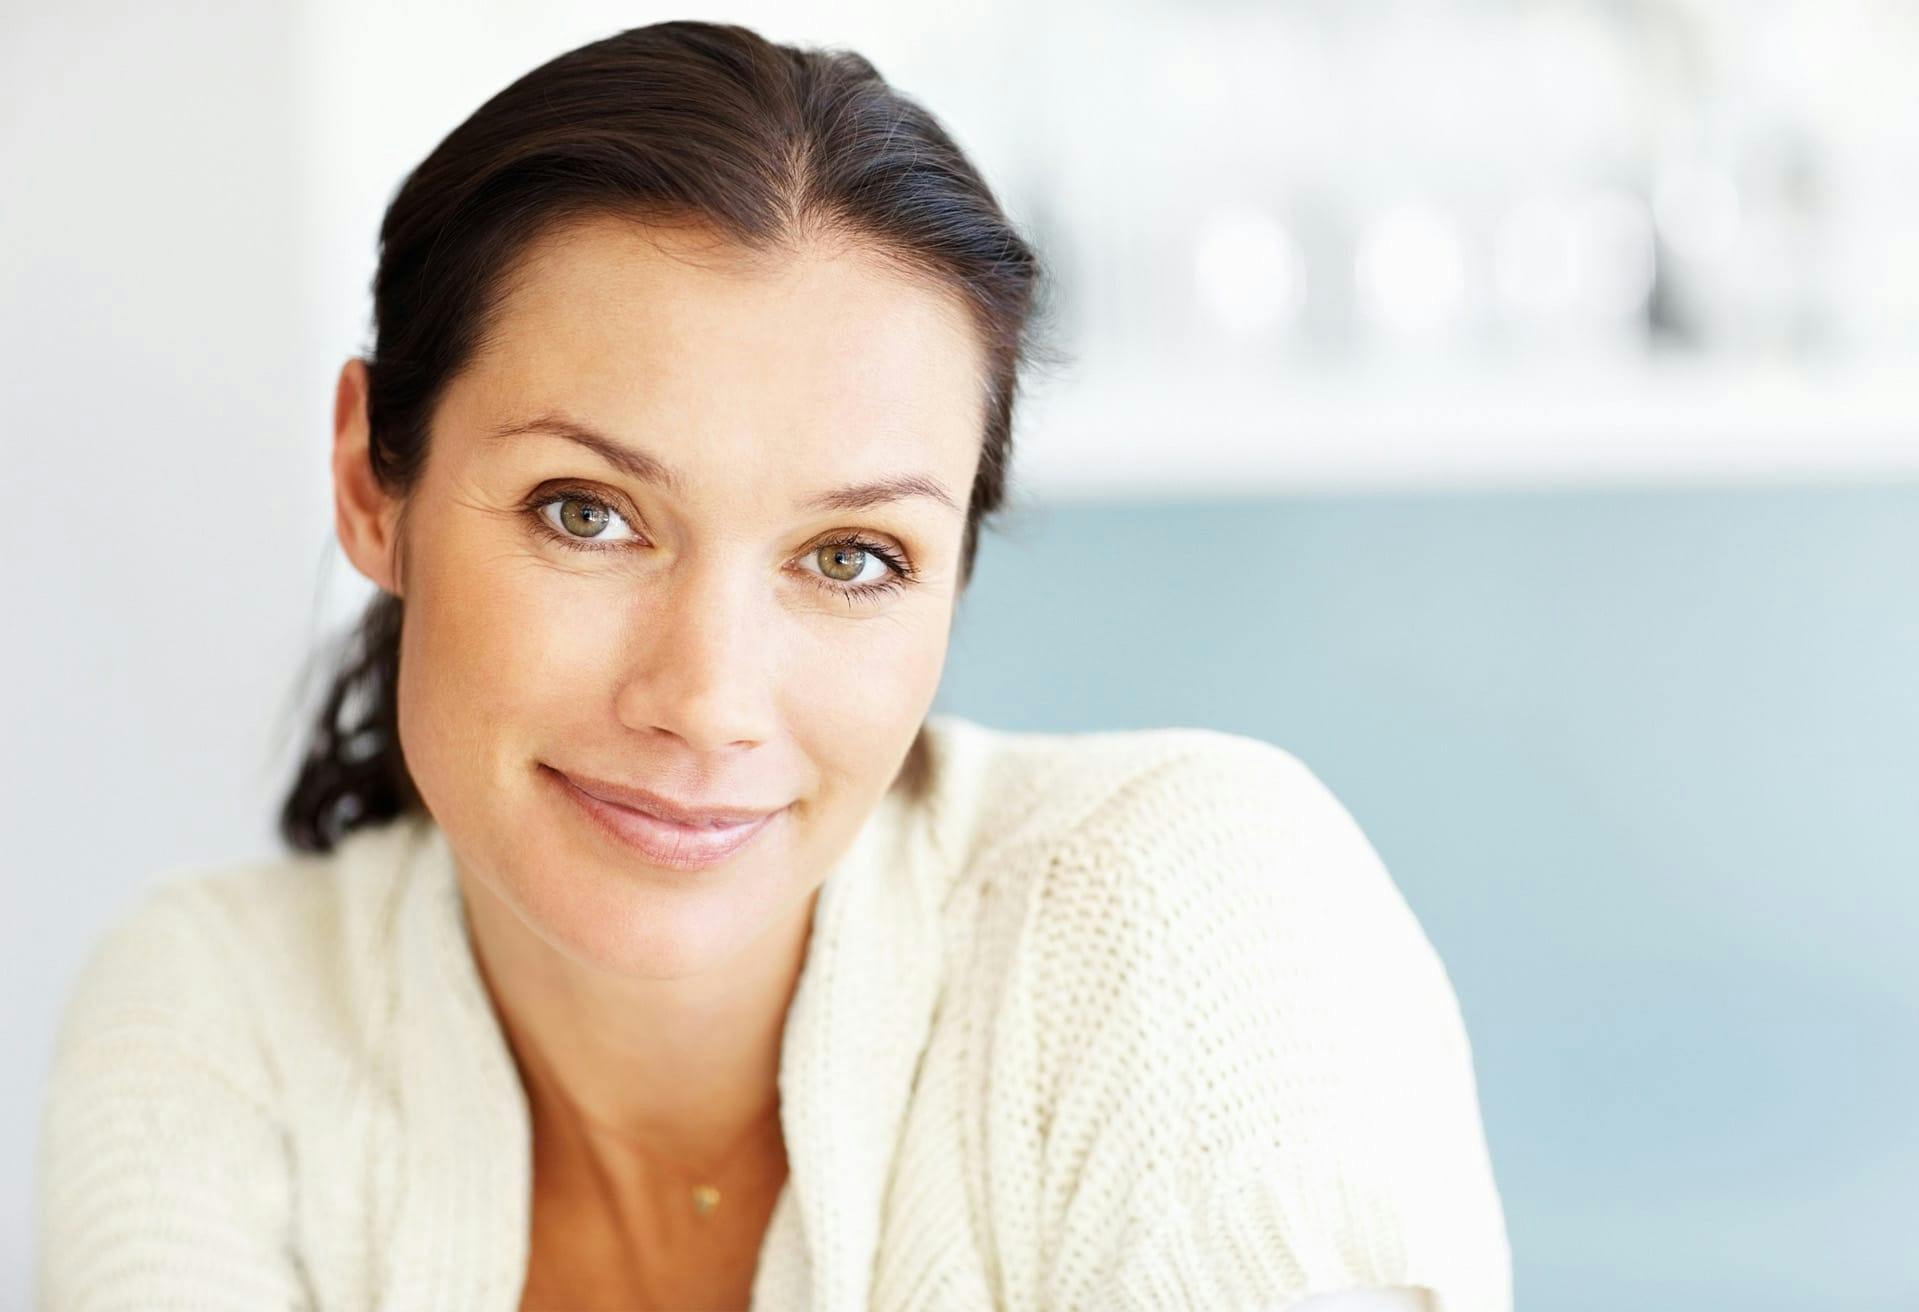 Woman with white sweater smiling